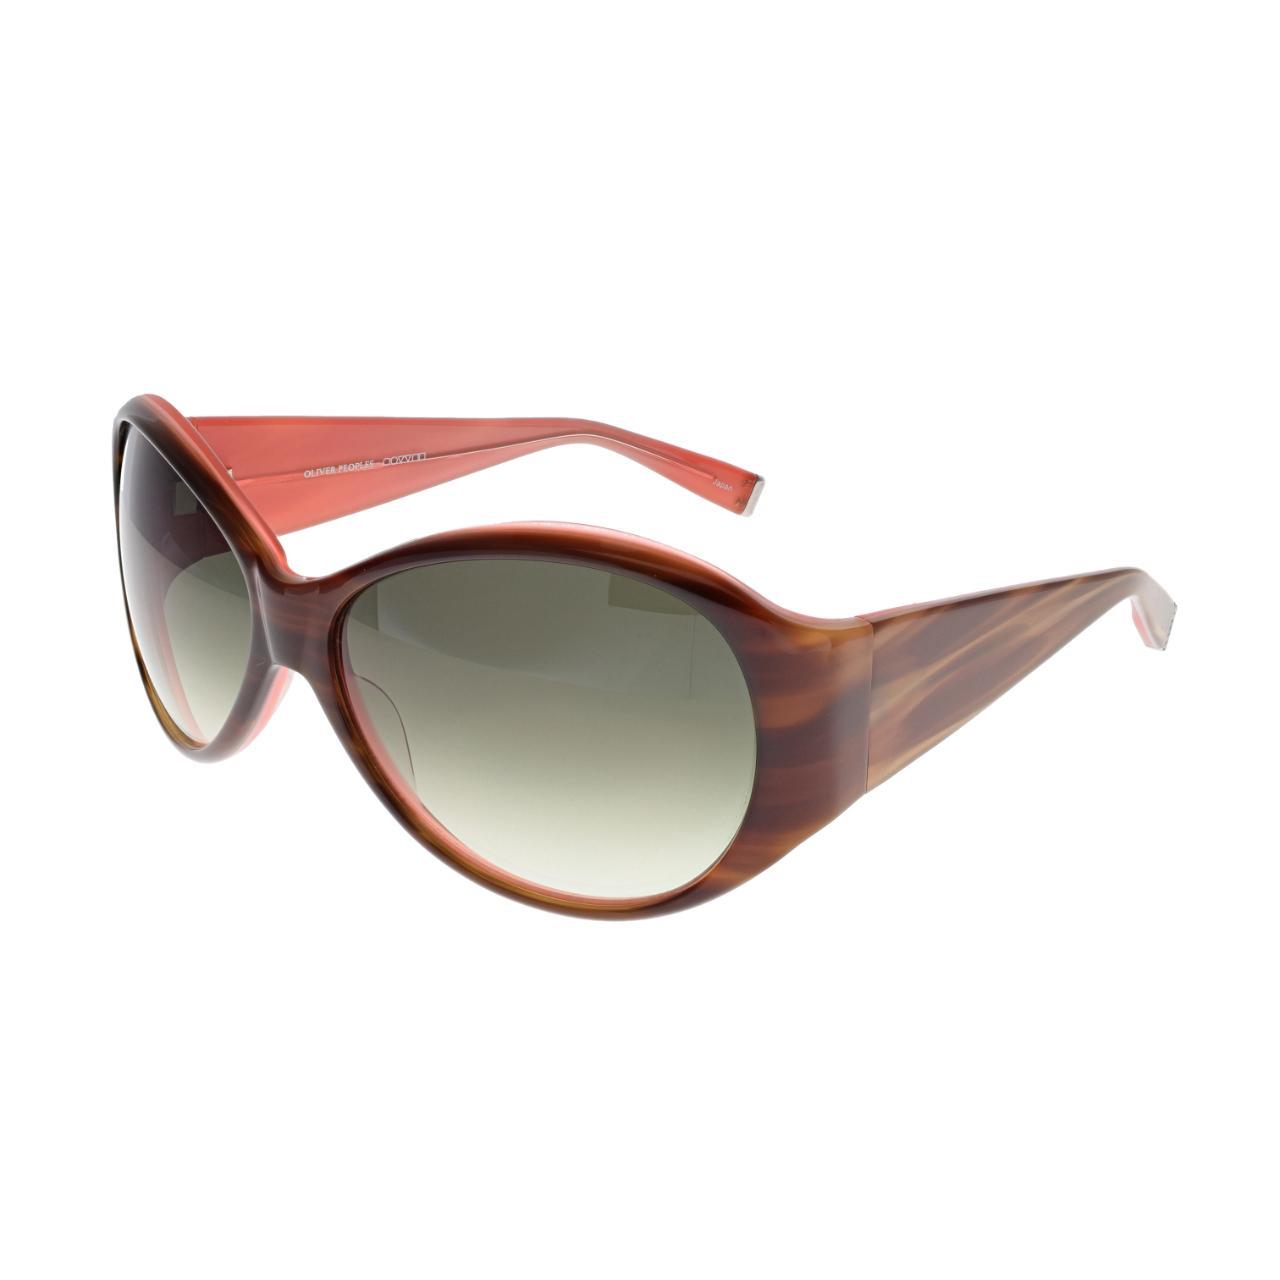 Oliver Peoples Women's Brown Sunglasses